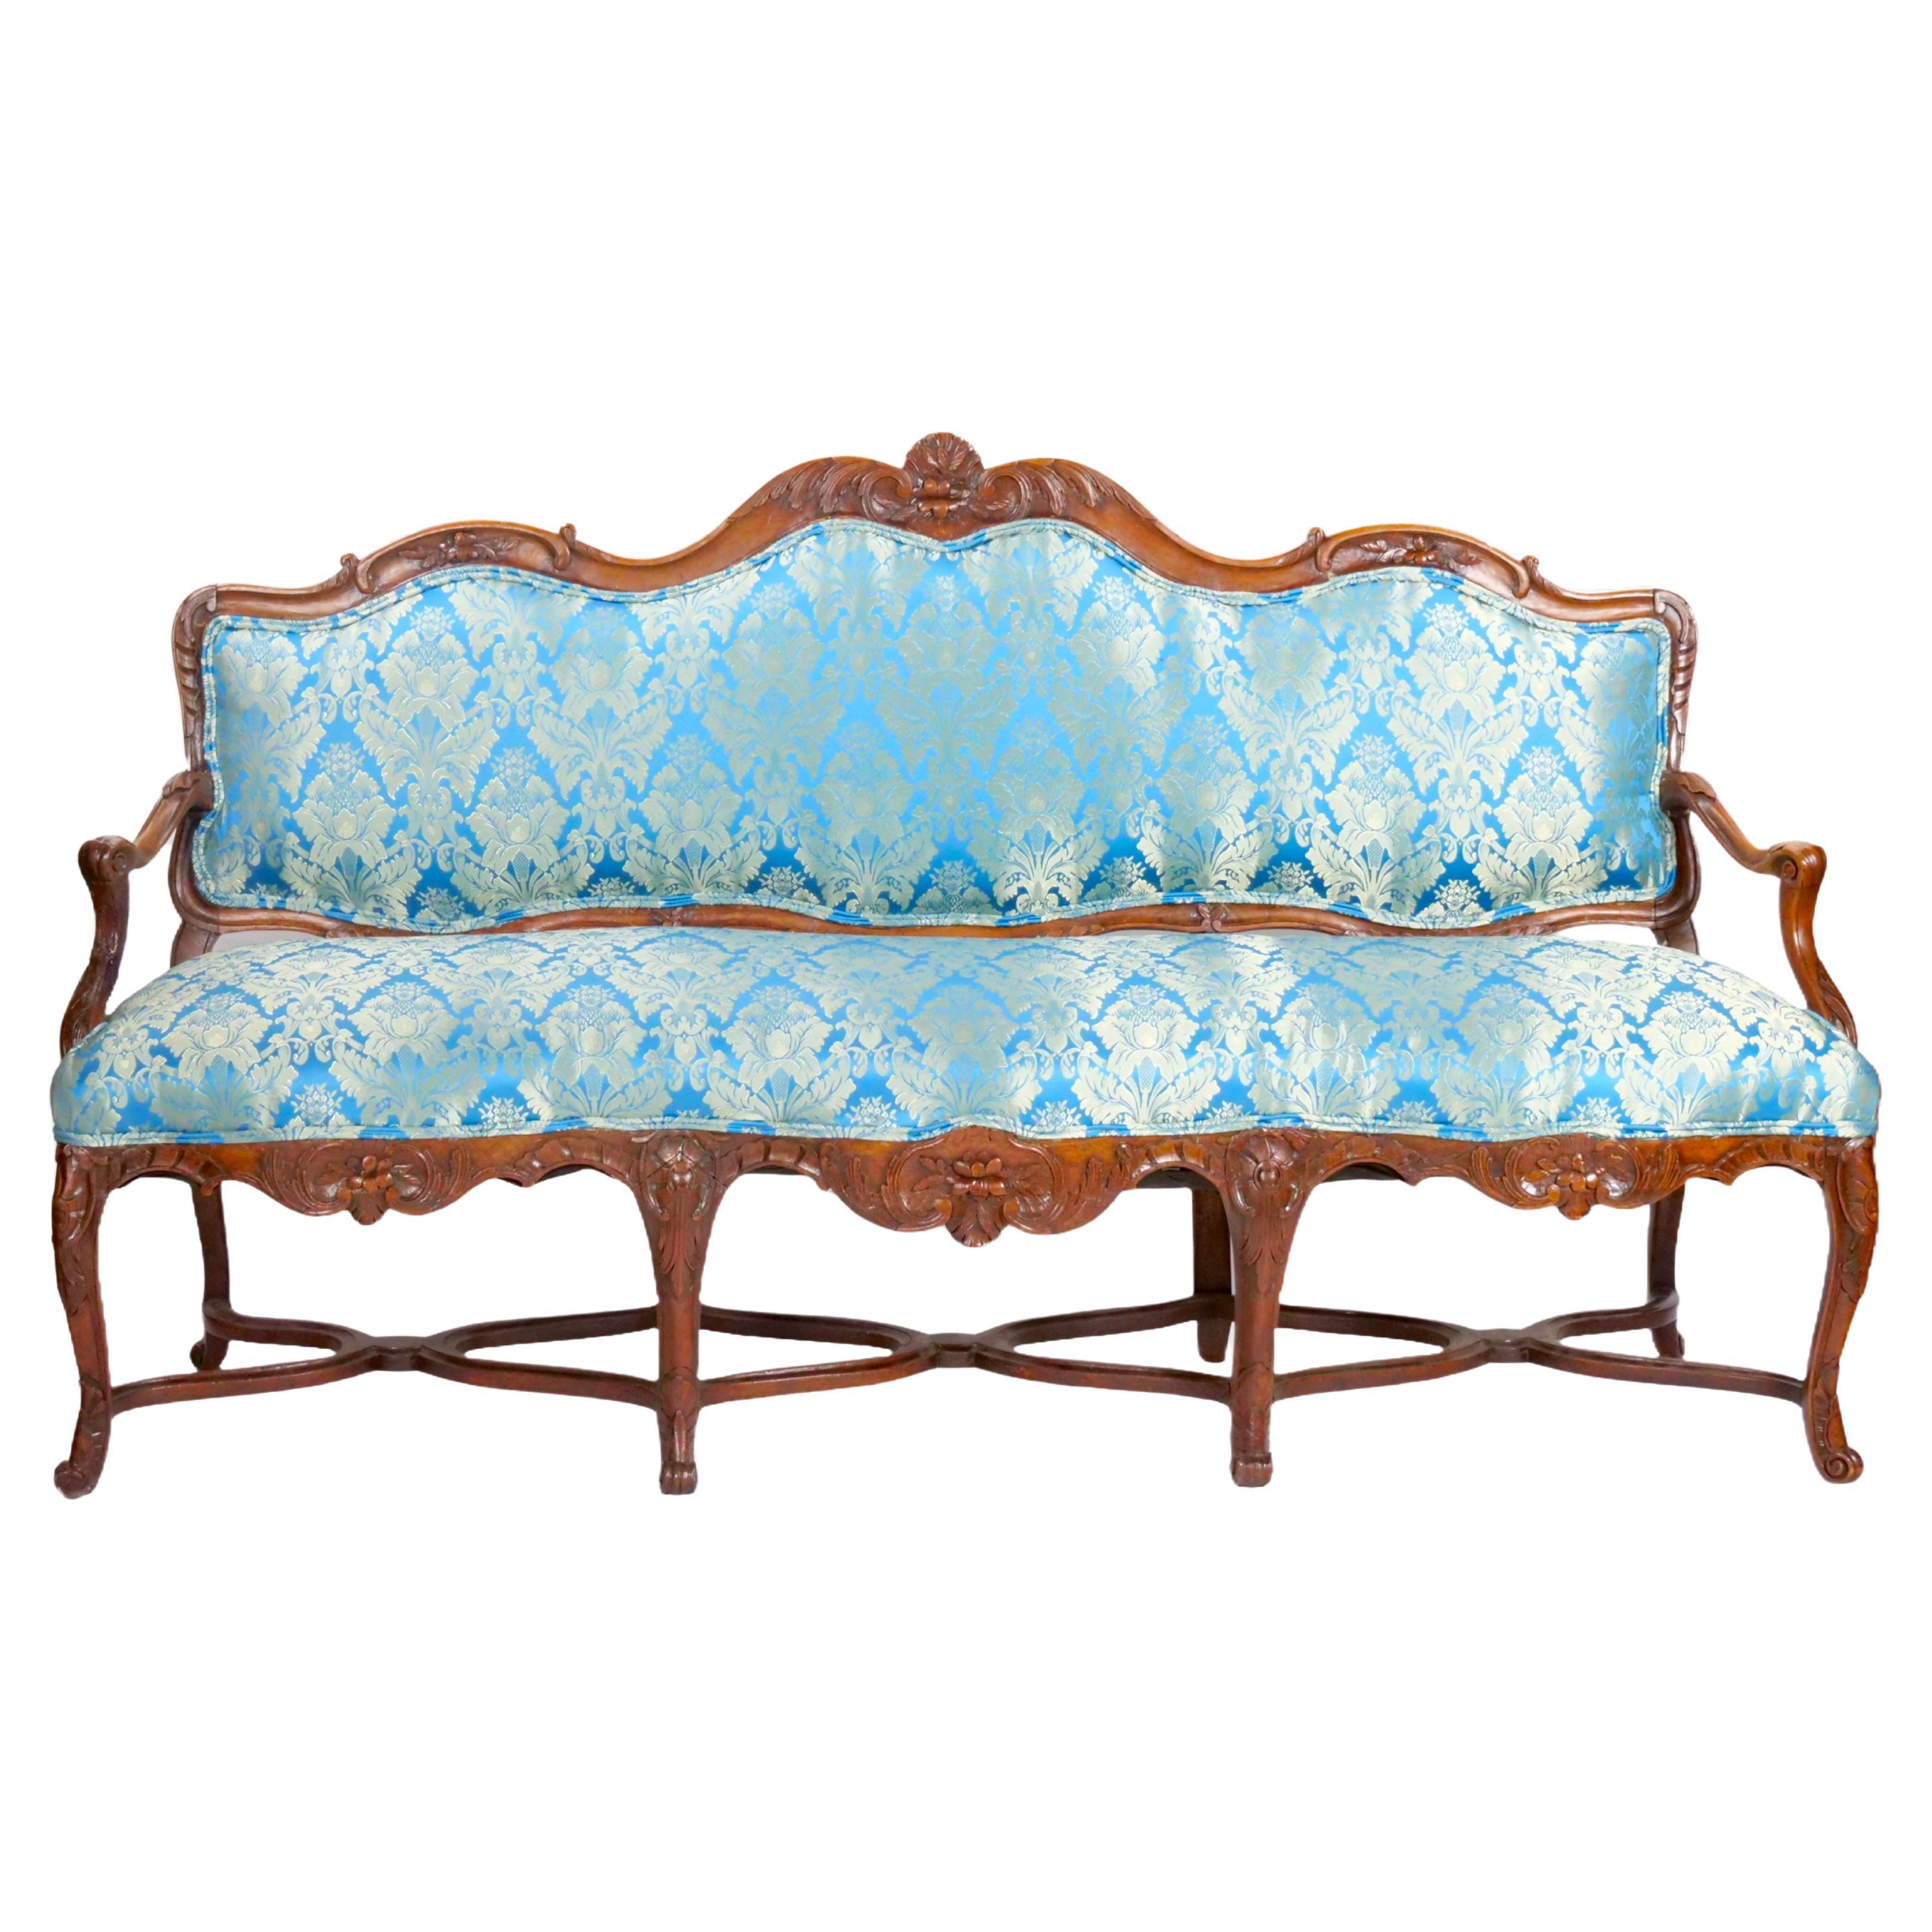 19th Century French Walnut Upholstered Three Seat Settee For Sale